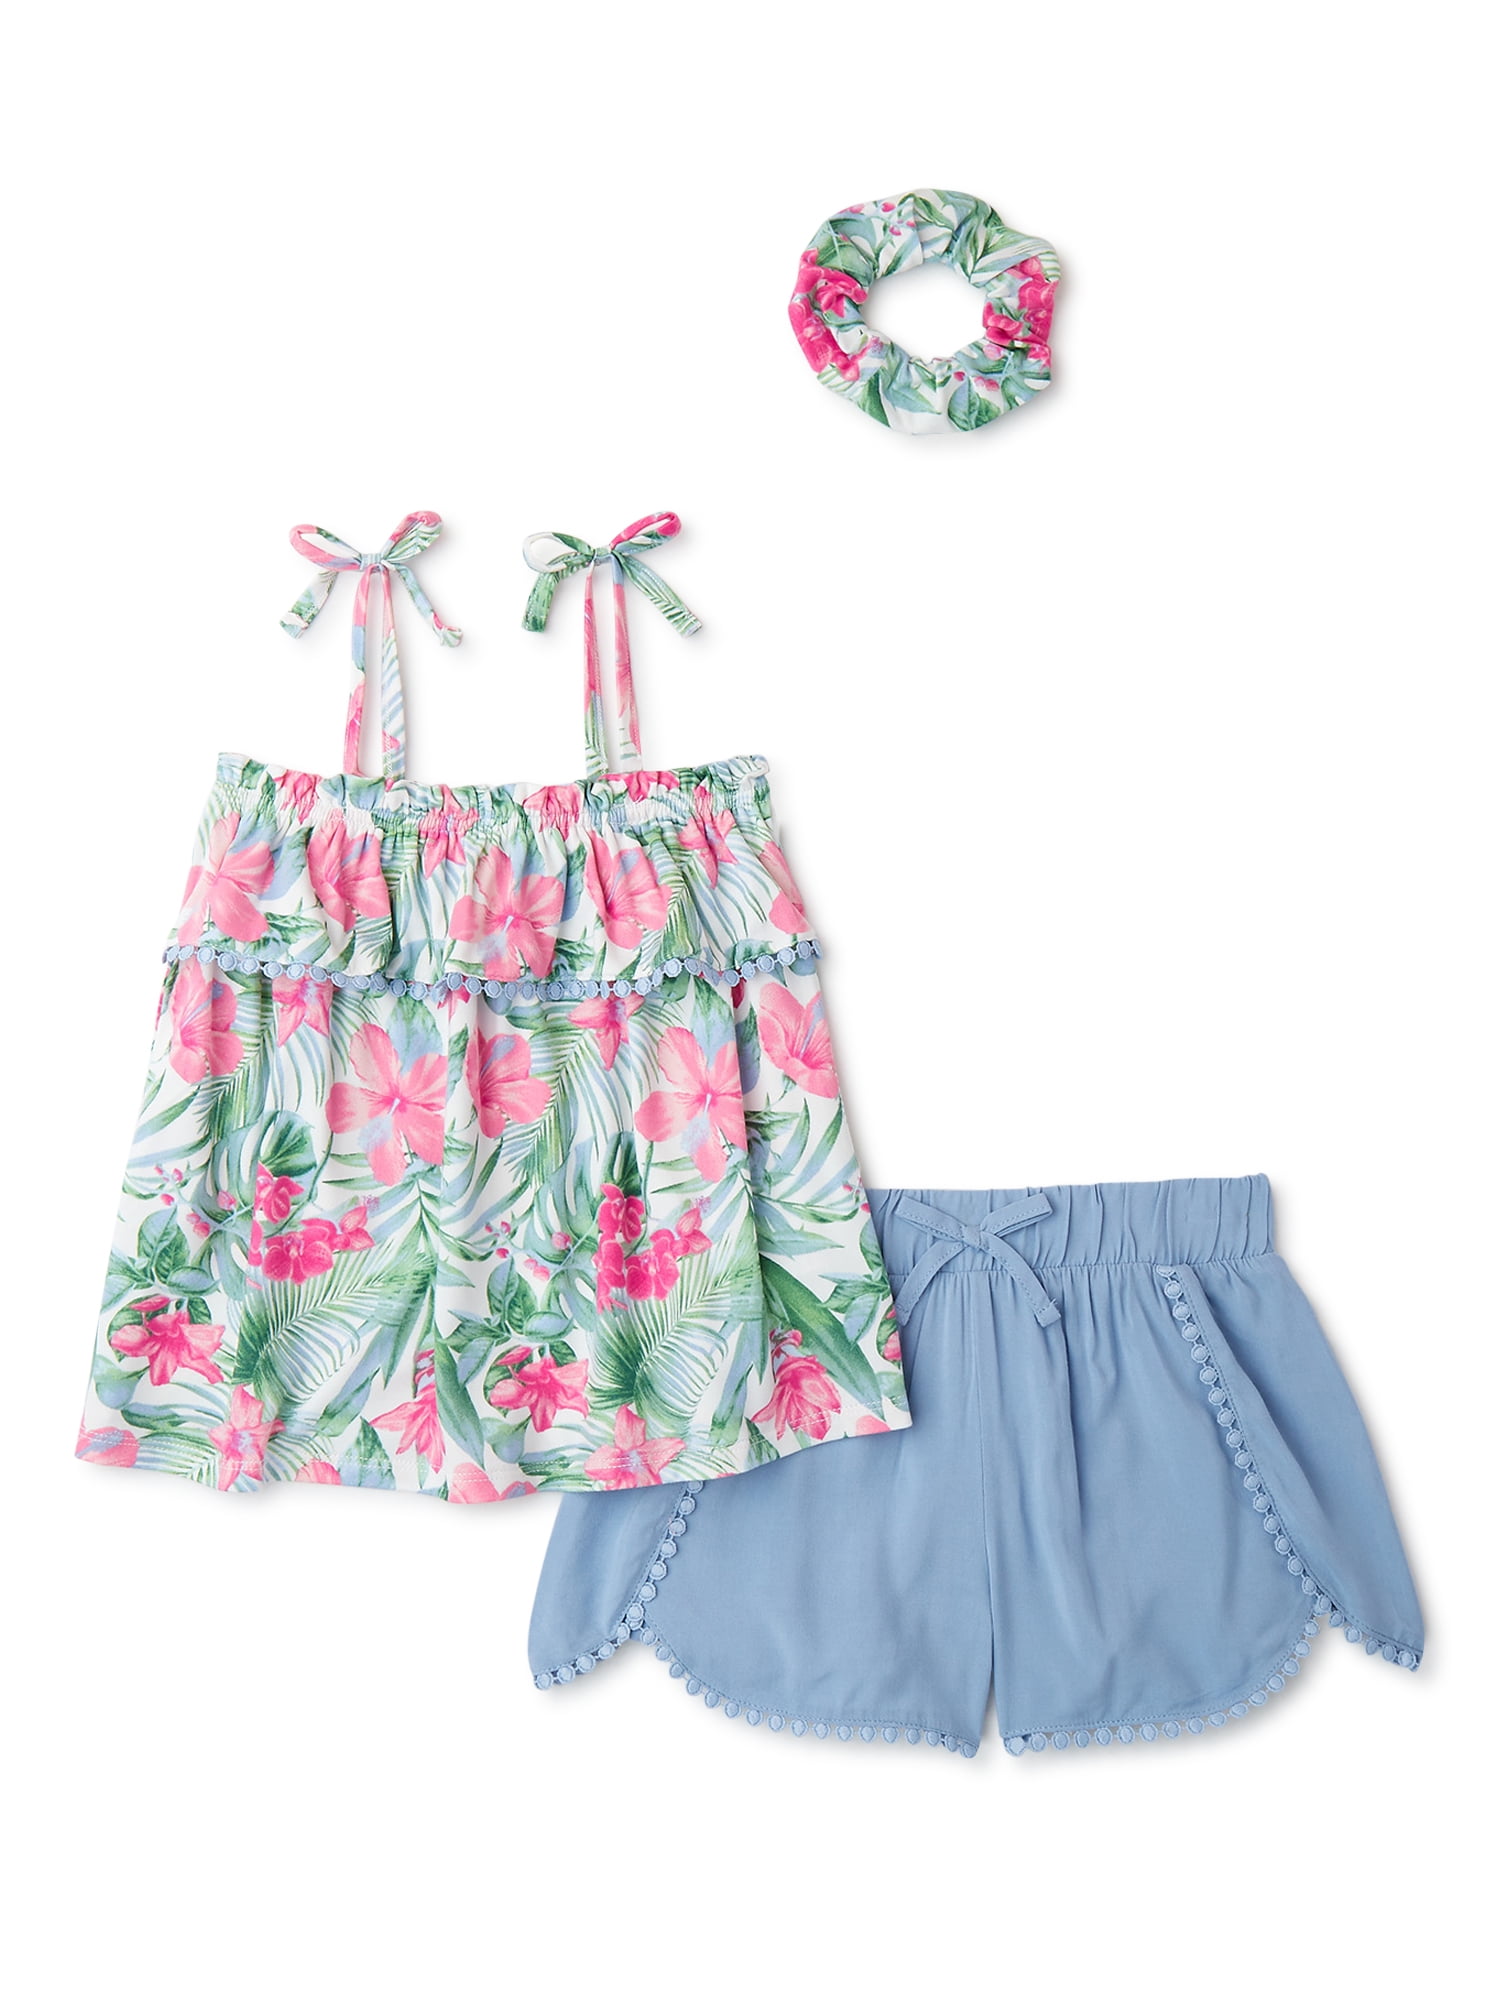 Girls Kids Ruffle Frill Layered Dress Shorts Two Piece Summer Outfit Co ord set 